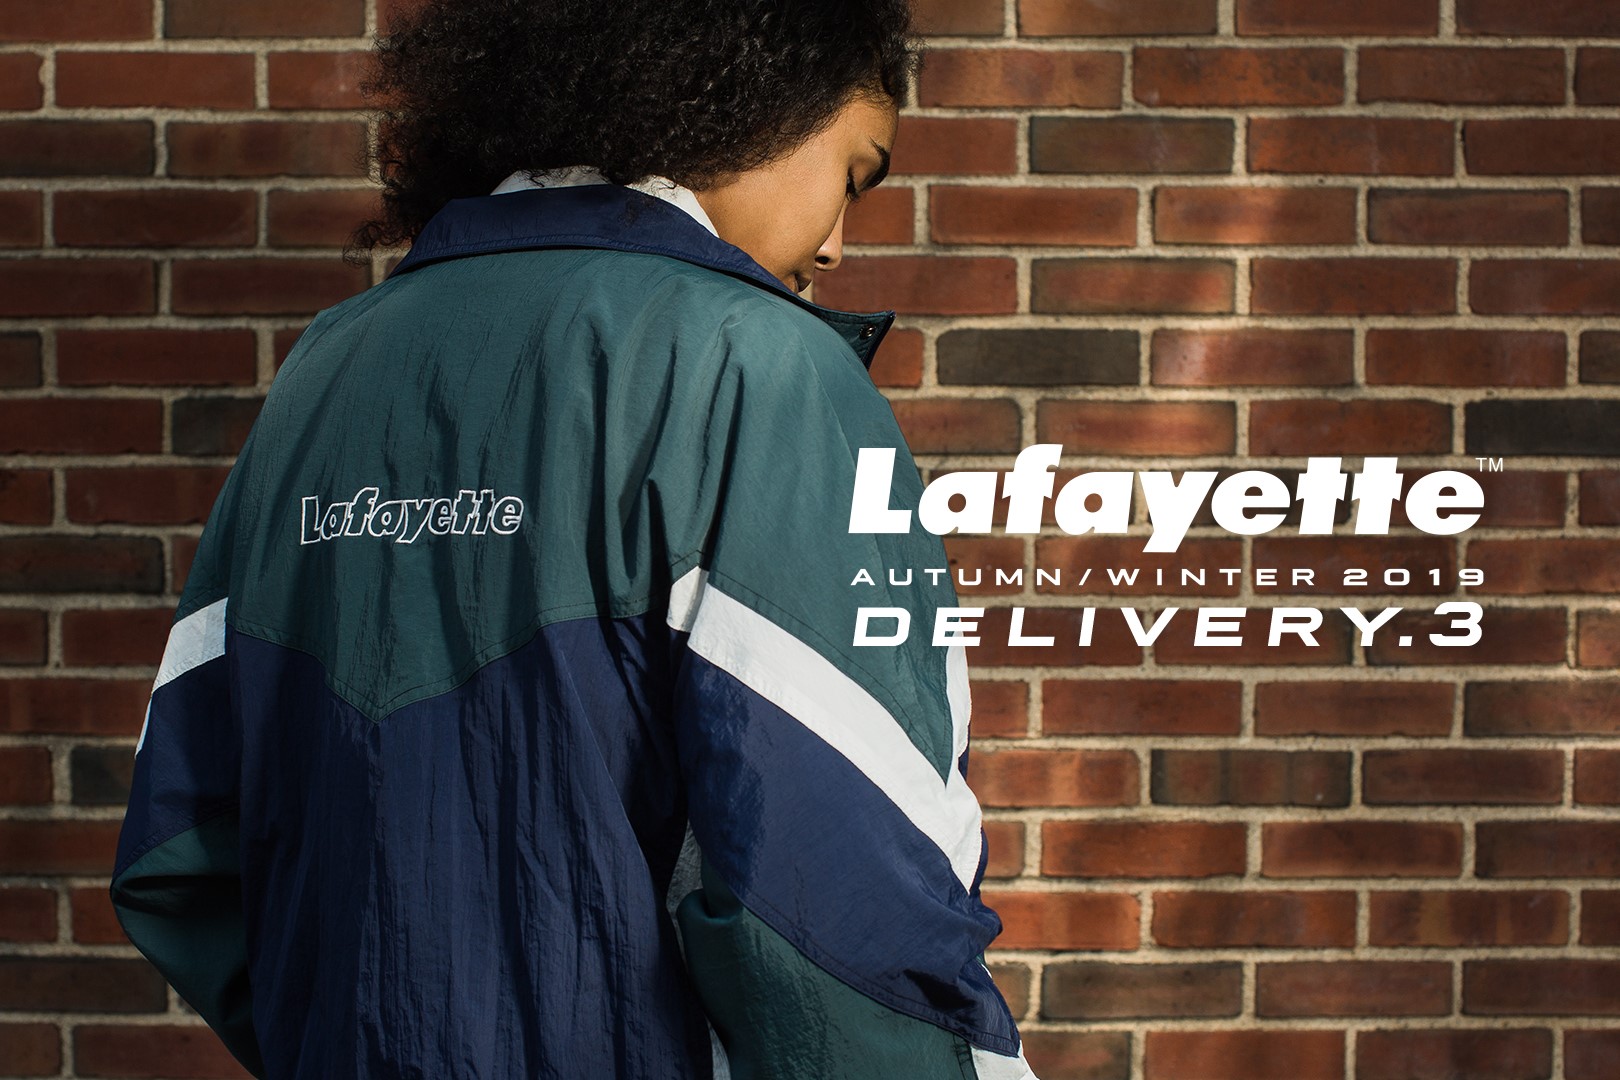 Lafayette 2019 Autumn/Winter Collection Delivery.3